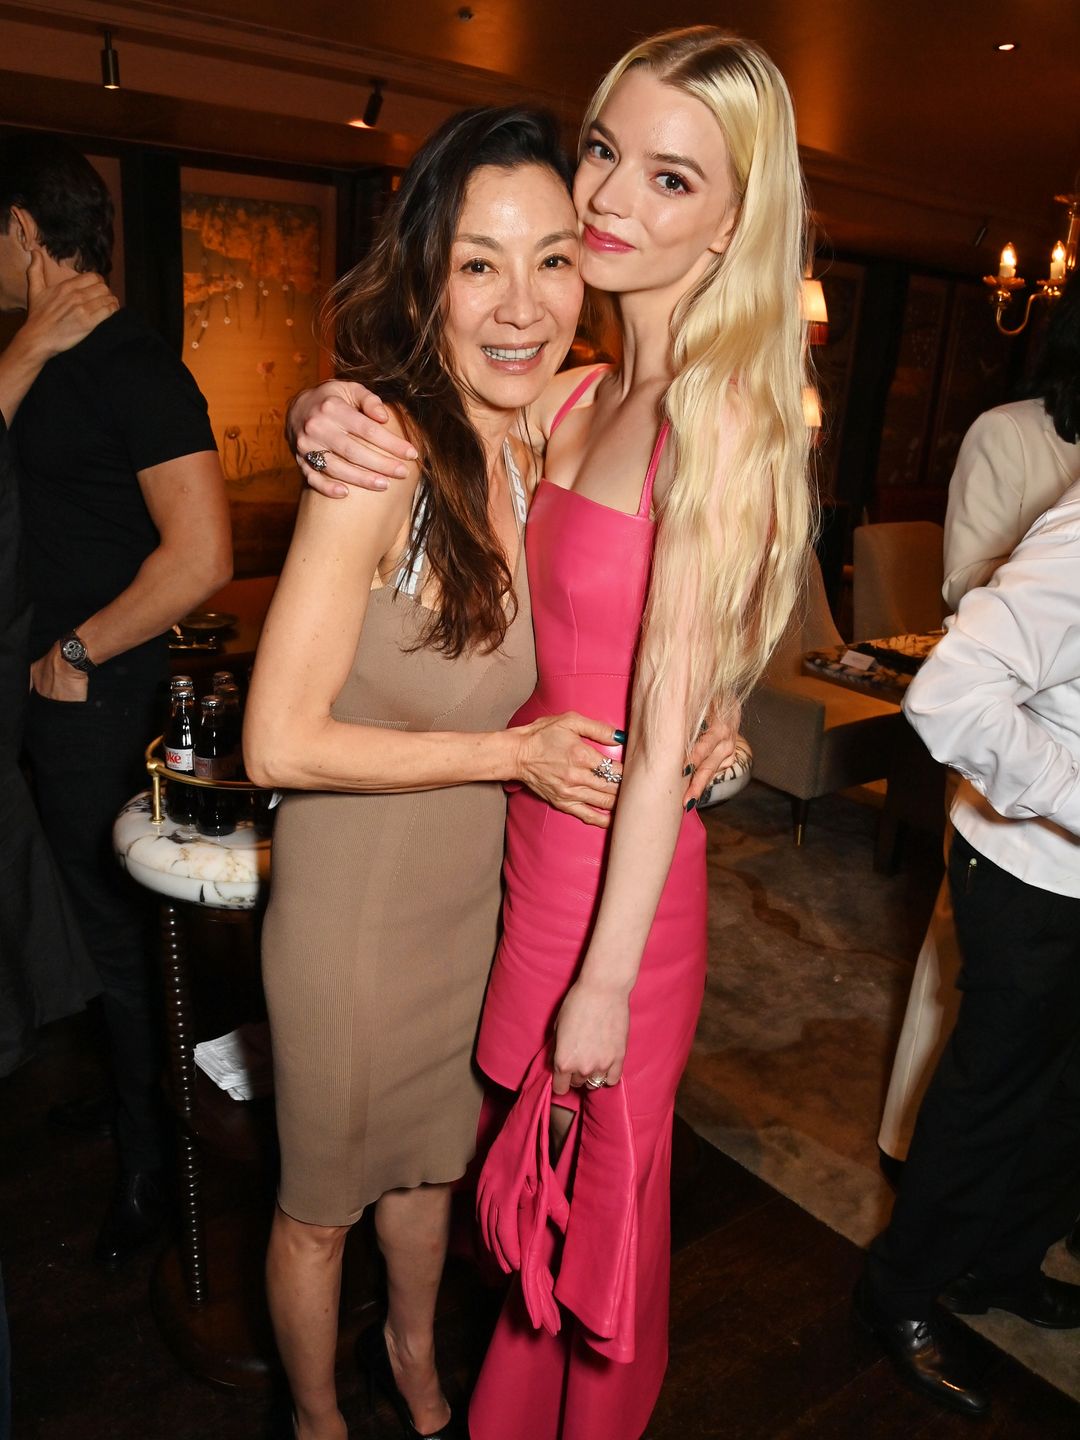 LONDON, ENGLAND - MARCH 26: Michelle Yeoh and Anya Taylor-Joy attend Michelle Yeoh's Oscar celebrations hosted by Yeoh's manager David Unger and the Mandarin Oriental Hyde Park, London at The Aubrey on March 26, 2023 in London, England. (Photo by Dave Ben